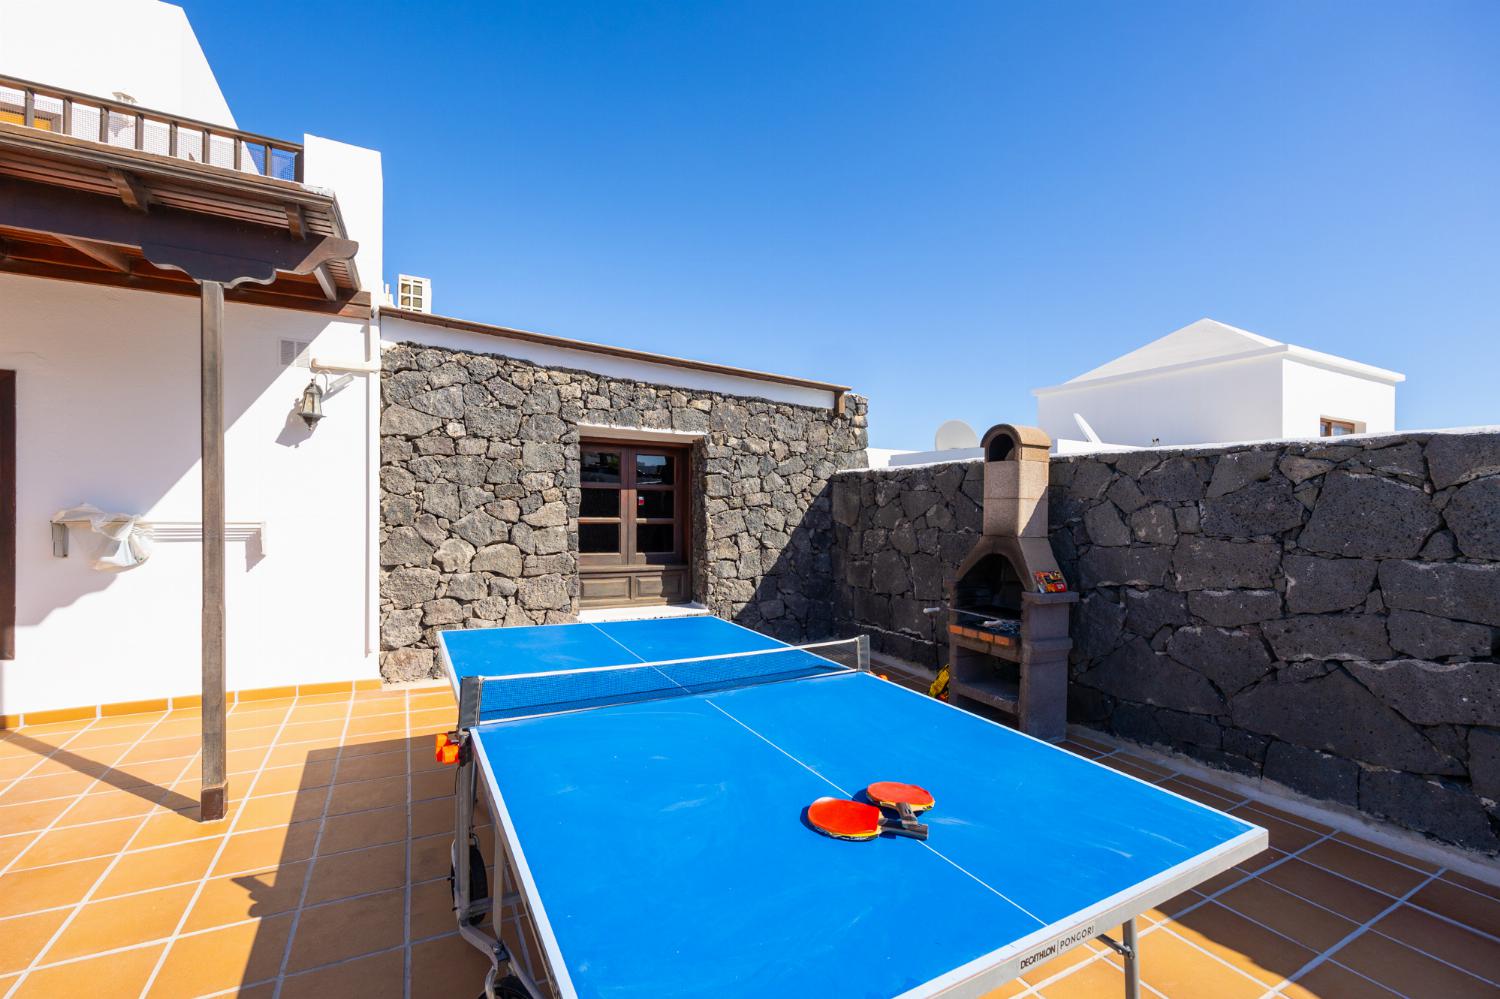 Terrace area with table tennis and BBQ